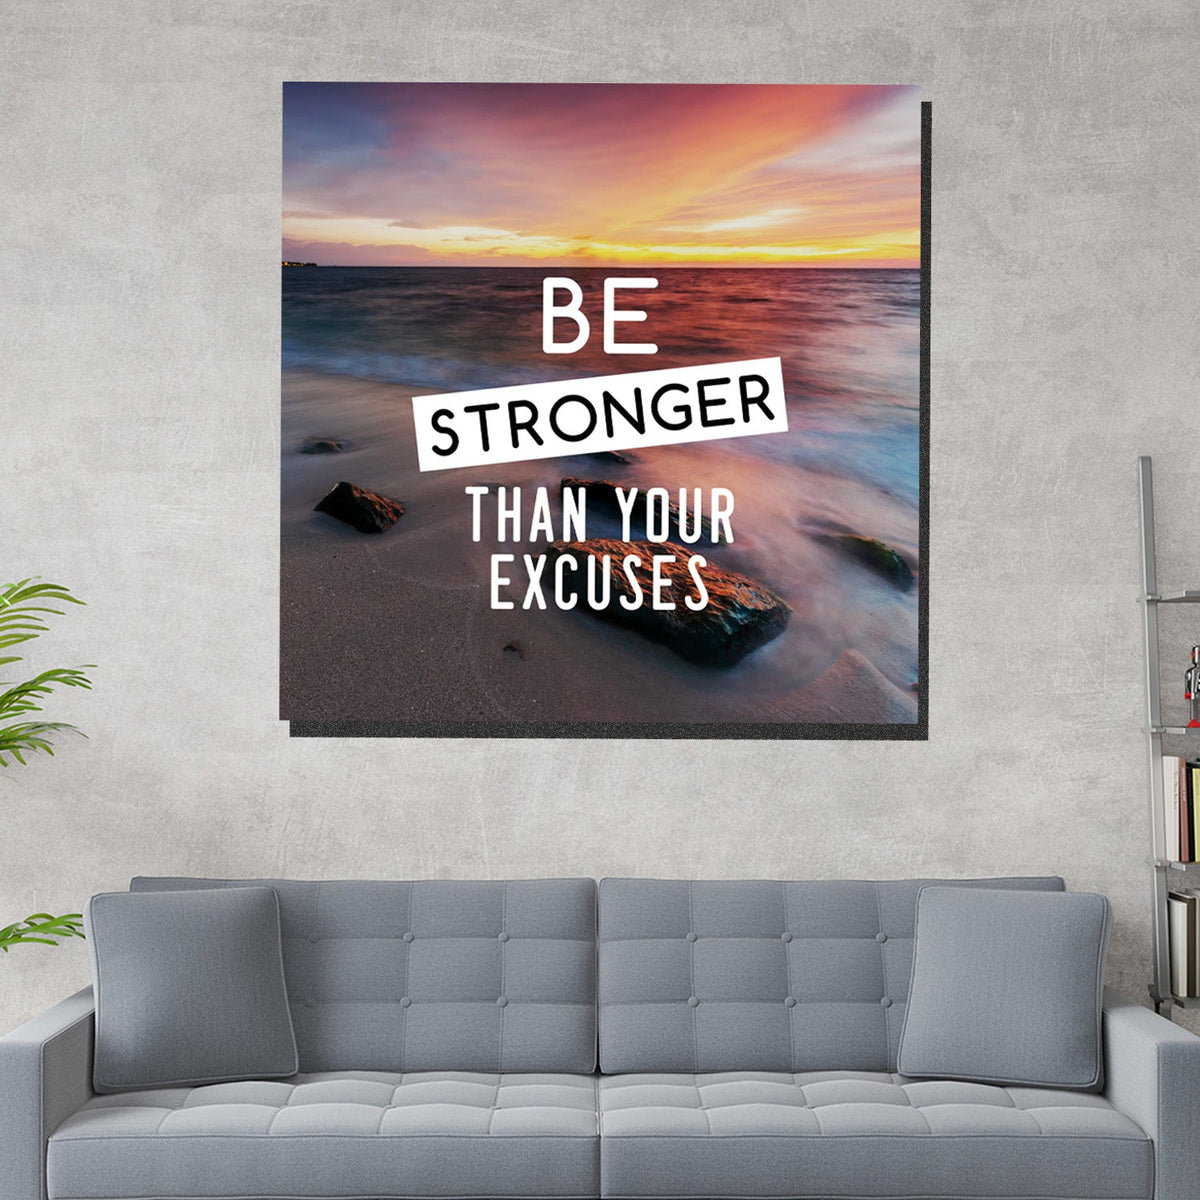 https://cdn.shopify.com/s/files/1/0387/9986/8044/products/BeStrongerCanvasArtprintStretched-4.jpg